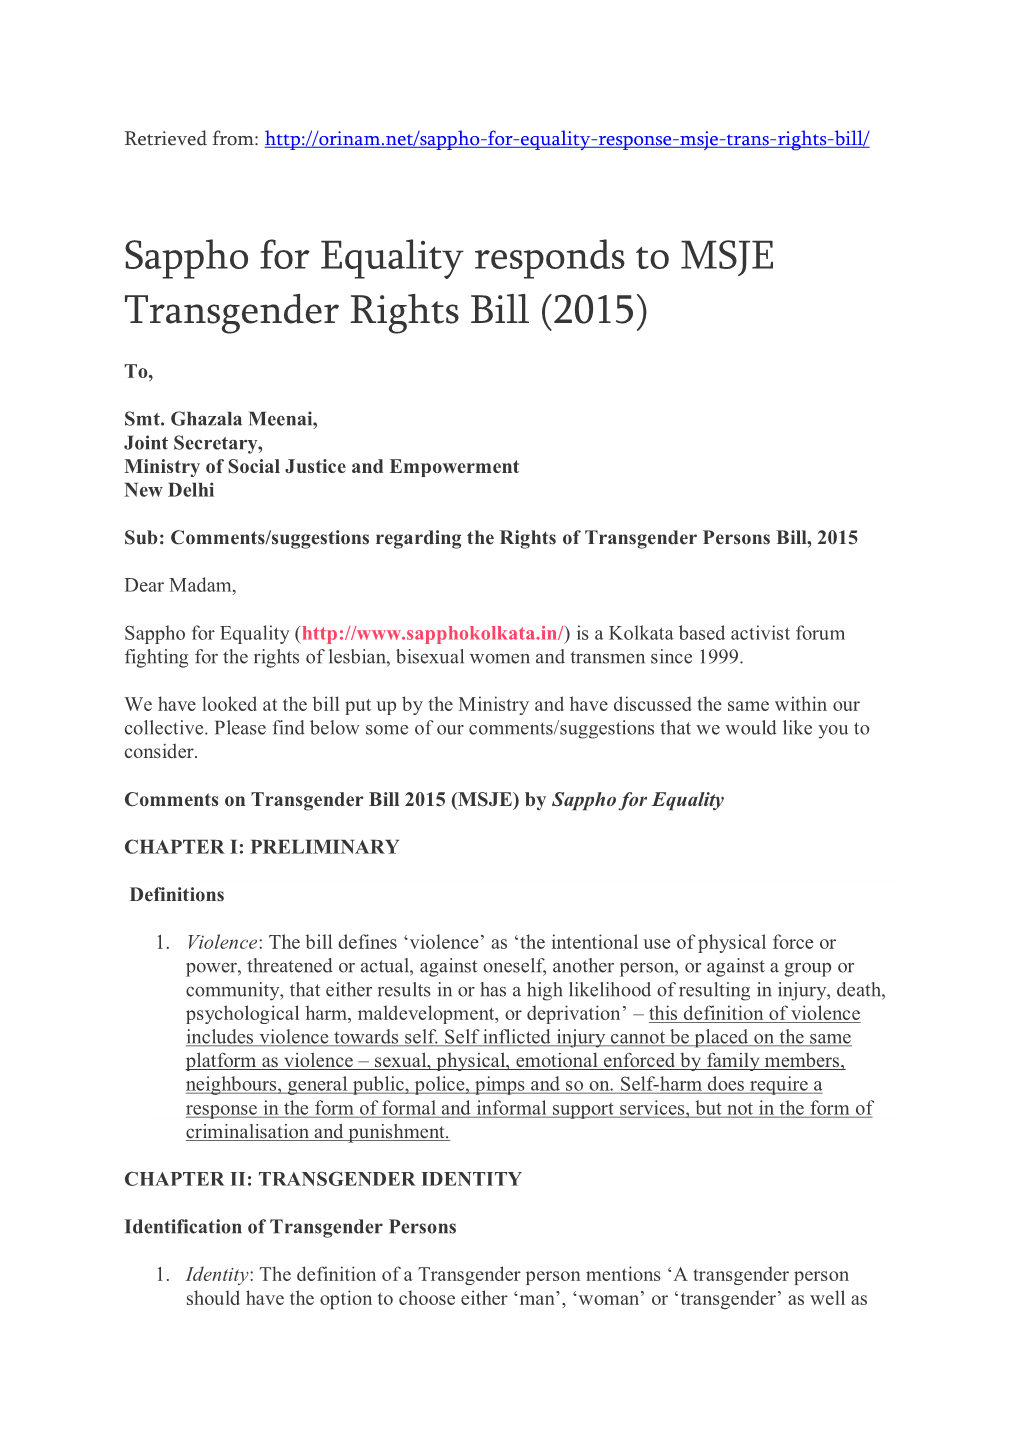 Sappho for Equality Responds to MSJE Transgender Rights Bill (2015)